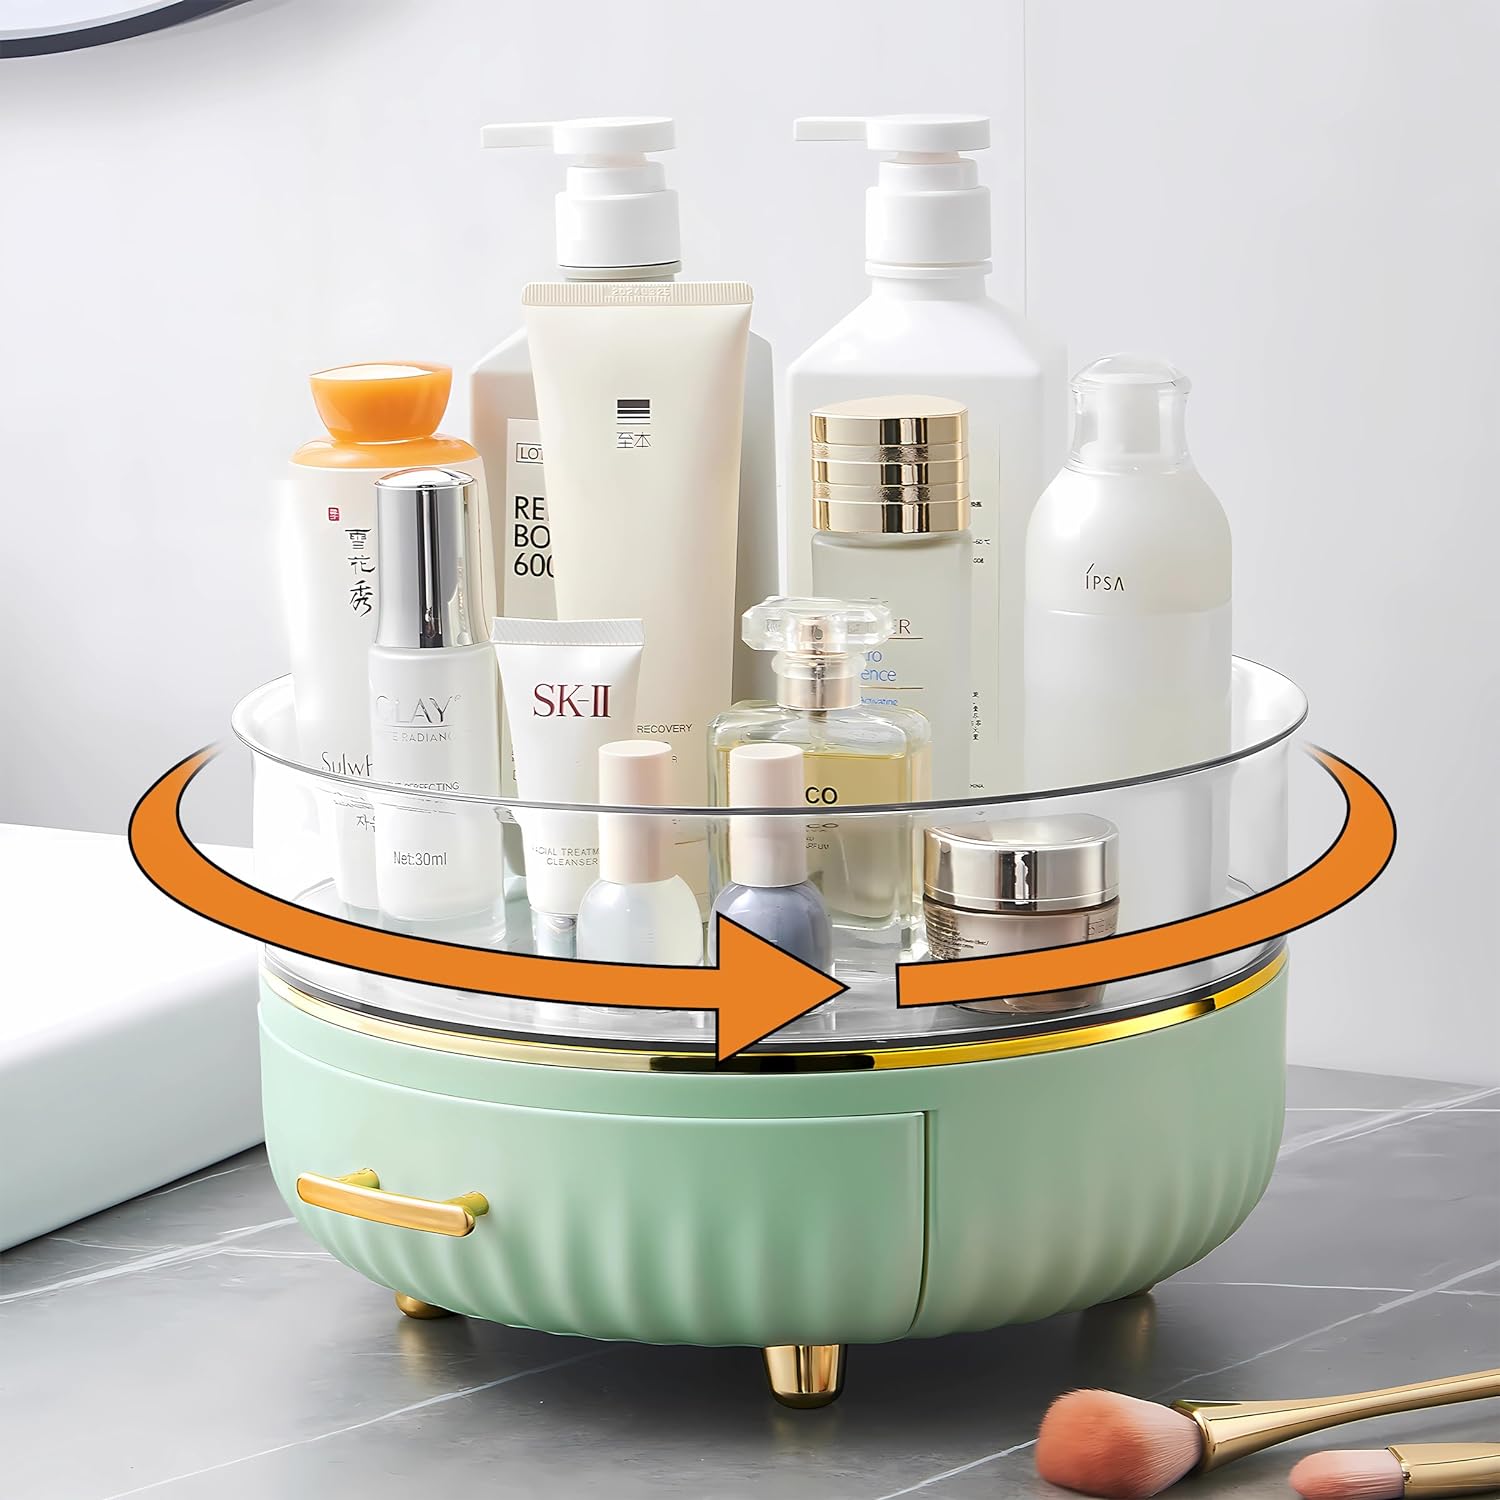 Makeup Skin Care Organizer for Dresser, Perfume Tray, 360 Degree Rotating Lazy Susan Cosmetic Storage, Contains a Drawer